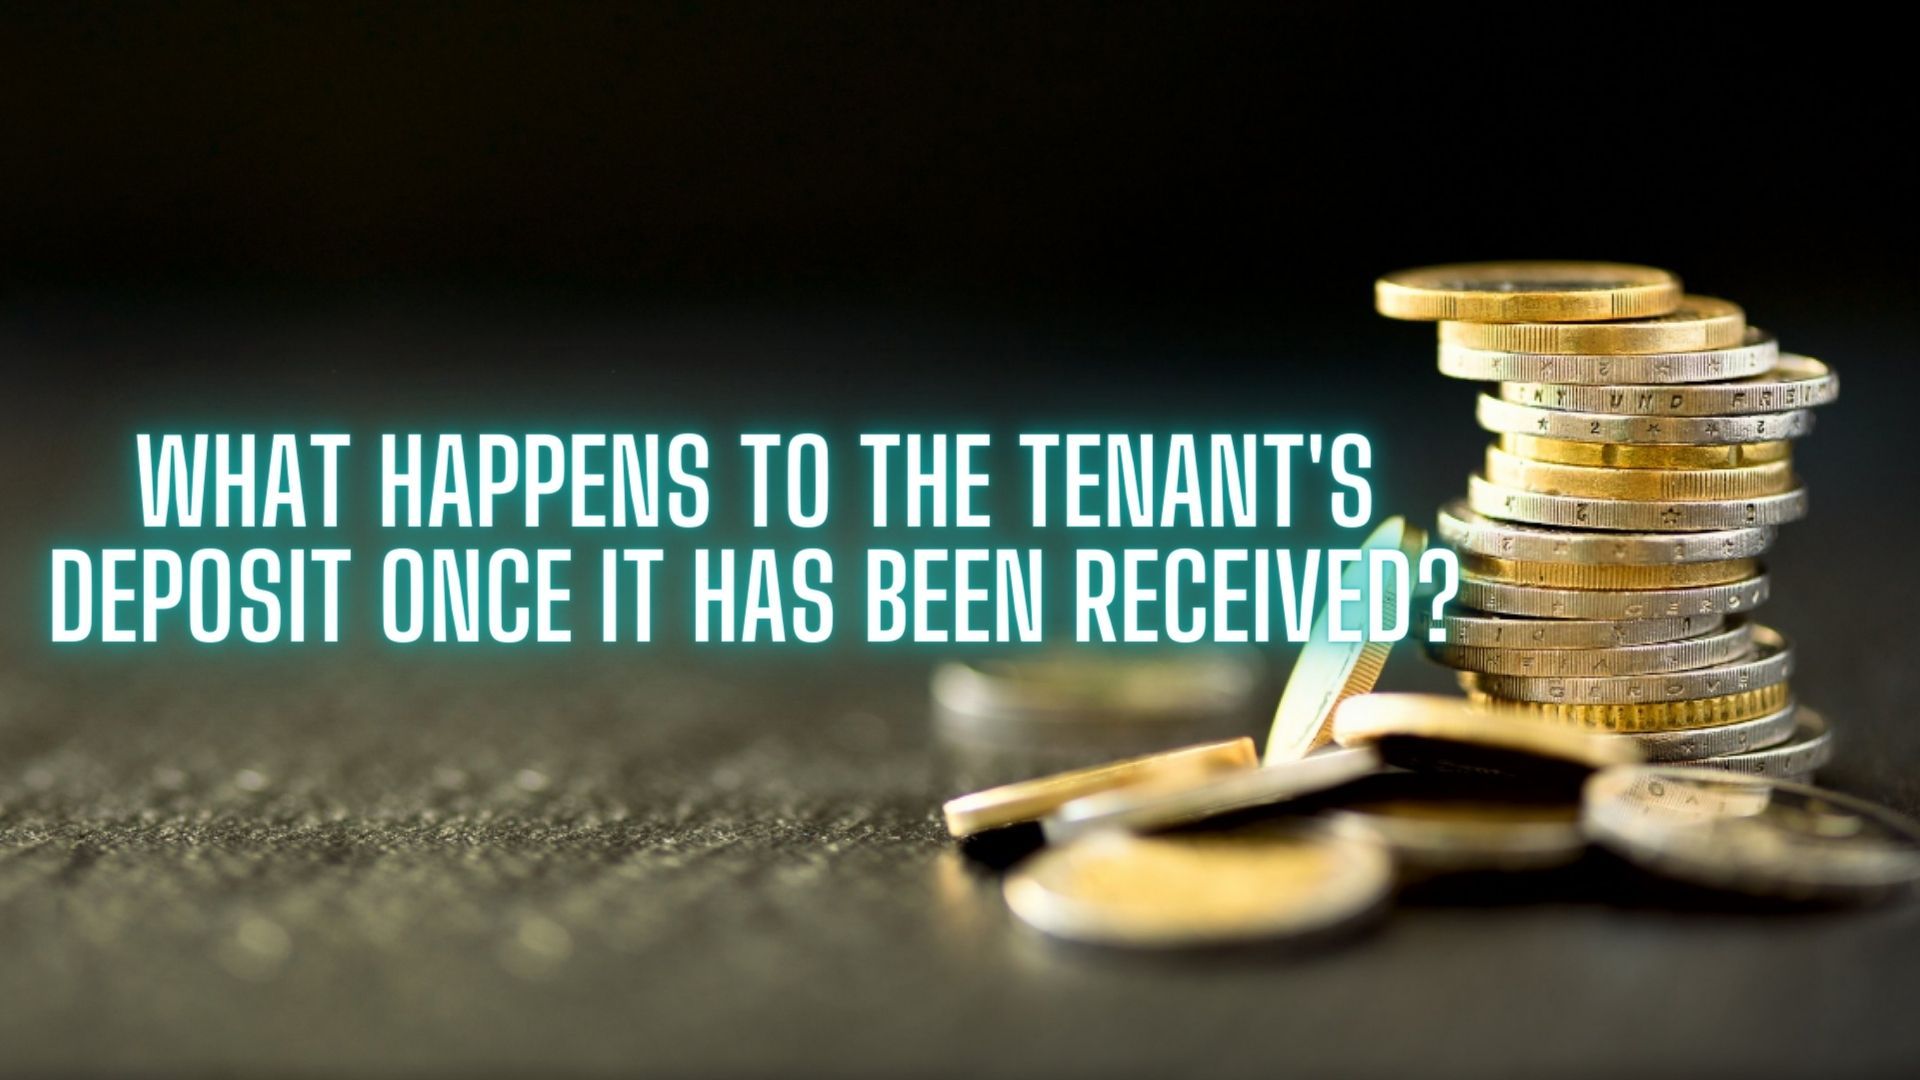 What Happens To The Tenant’s Deposit Once It Has Been Received?